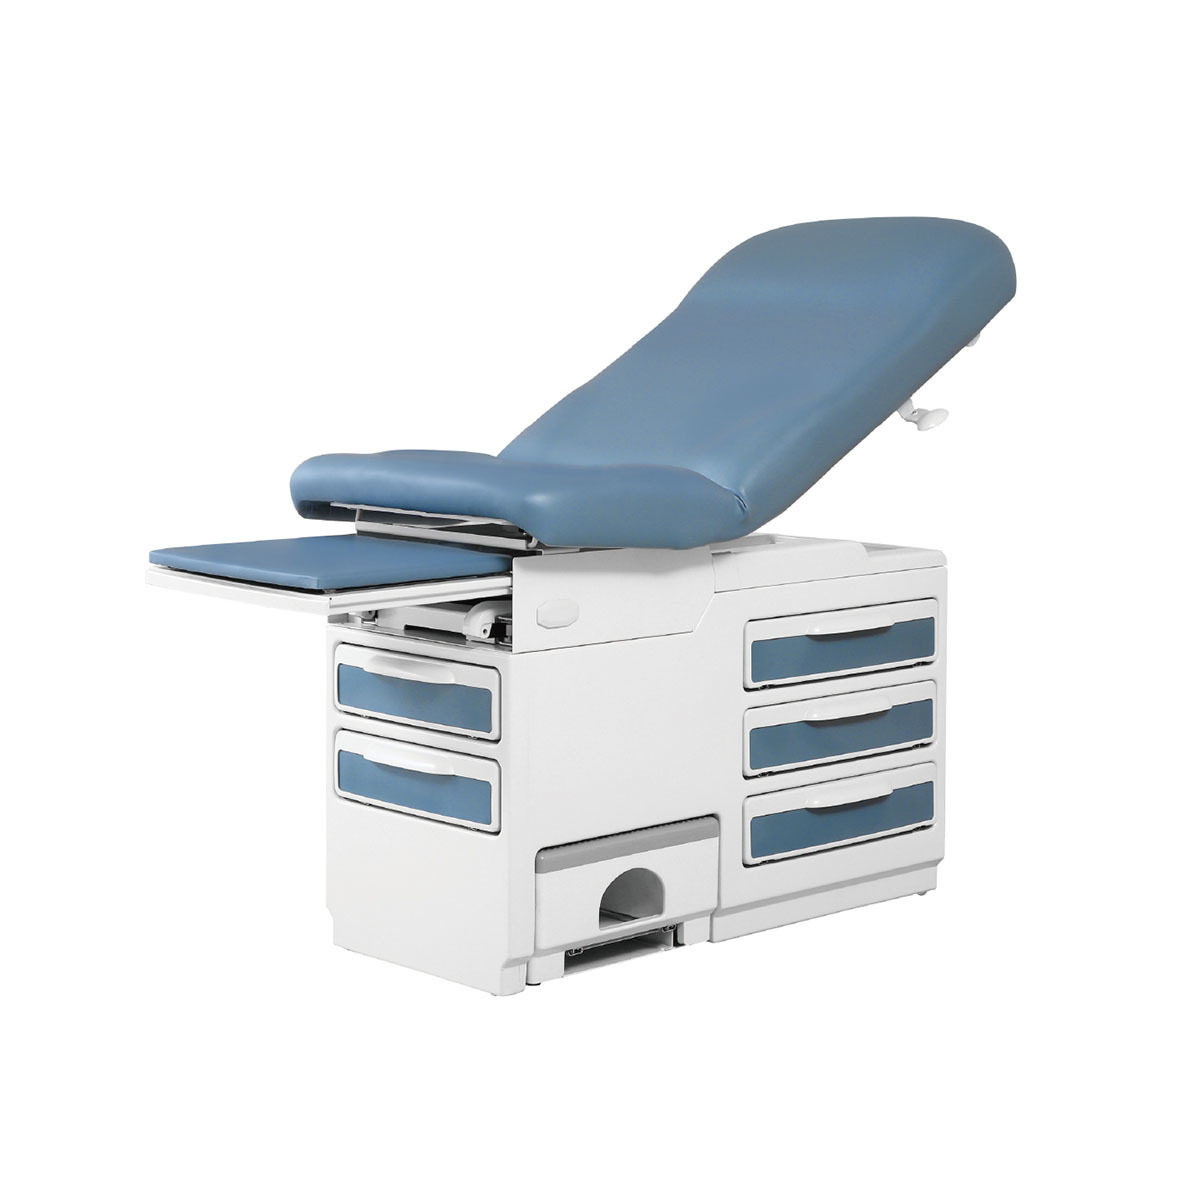 HL-A240A Gynaecological Examination Bed